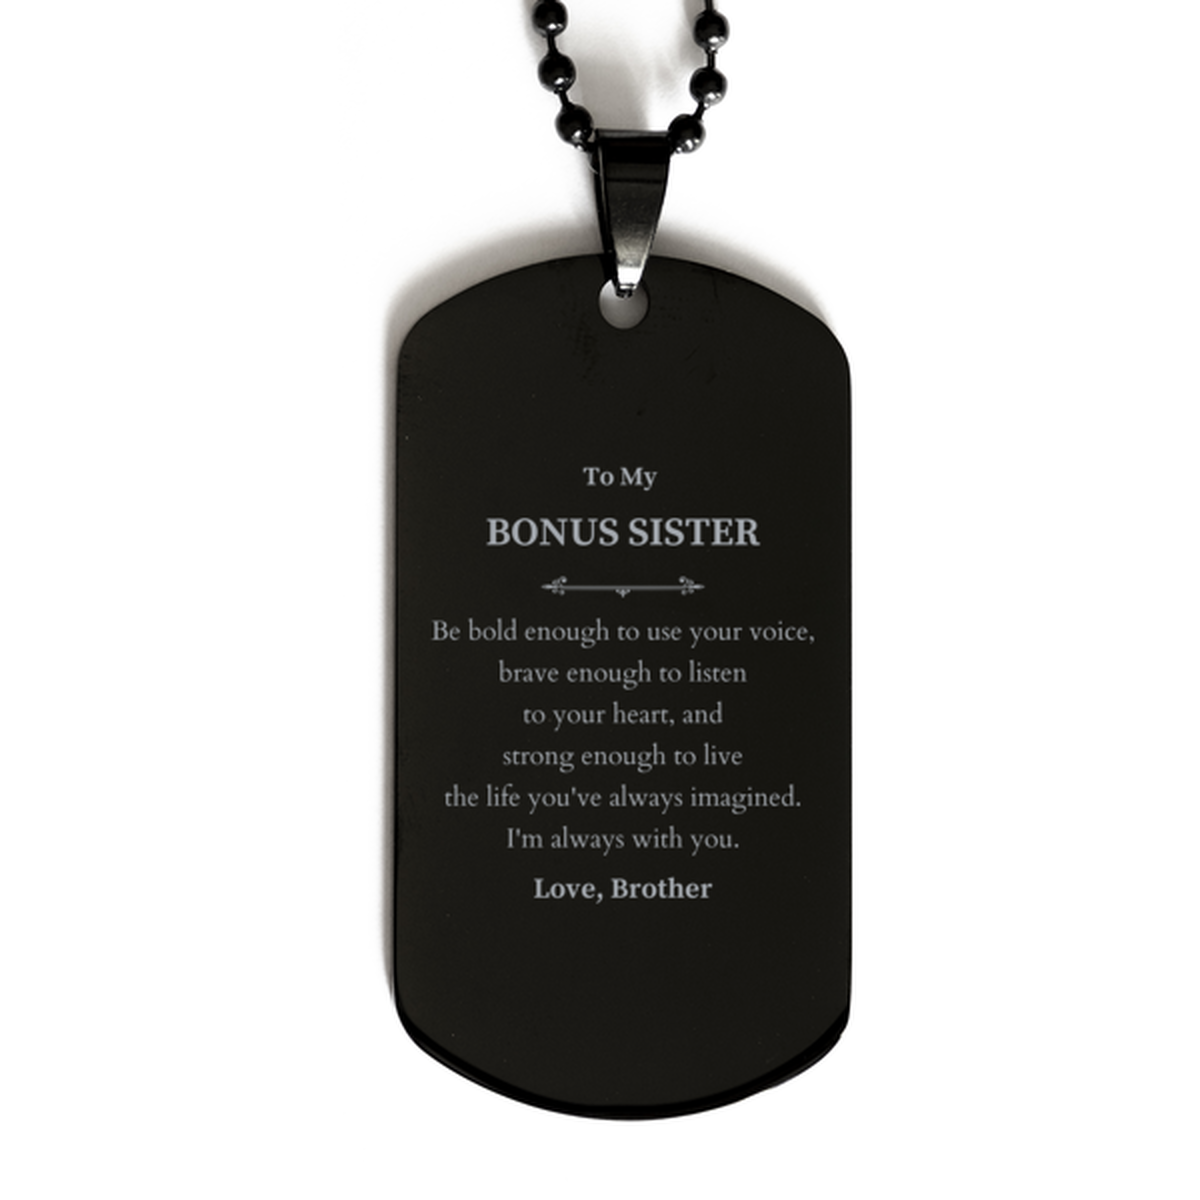 Keepsake Bonus Sister Black Dog Tag Gift Idea Graduation Christmas Birthday Bonus Sister from Brother, Bonus Sister Be bold enough to use your voice, brave enough to listen to your heart. Love, Brother